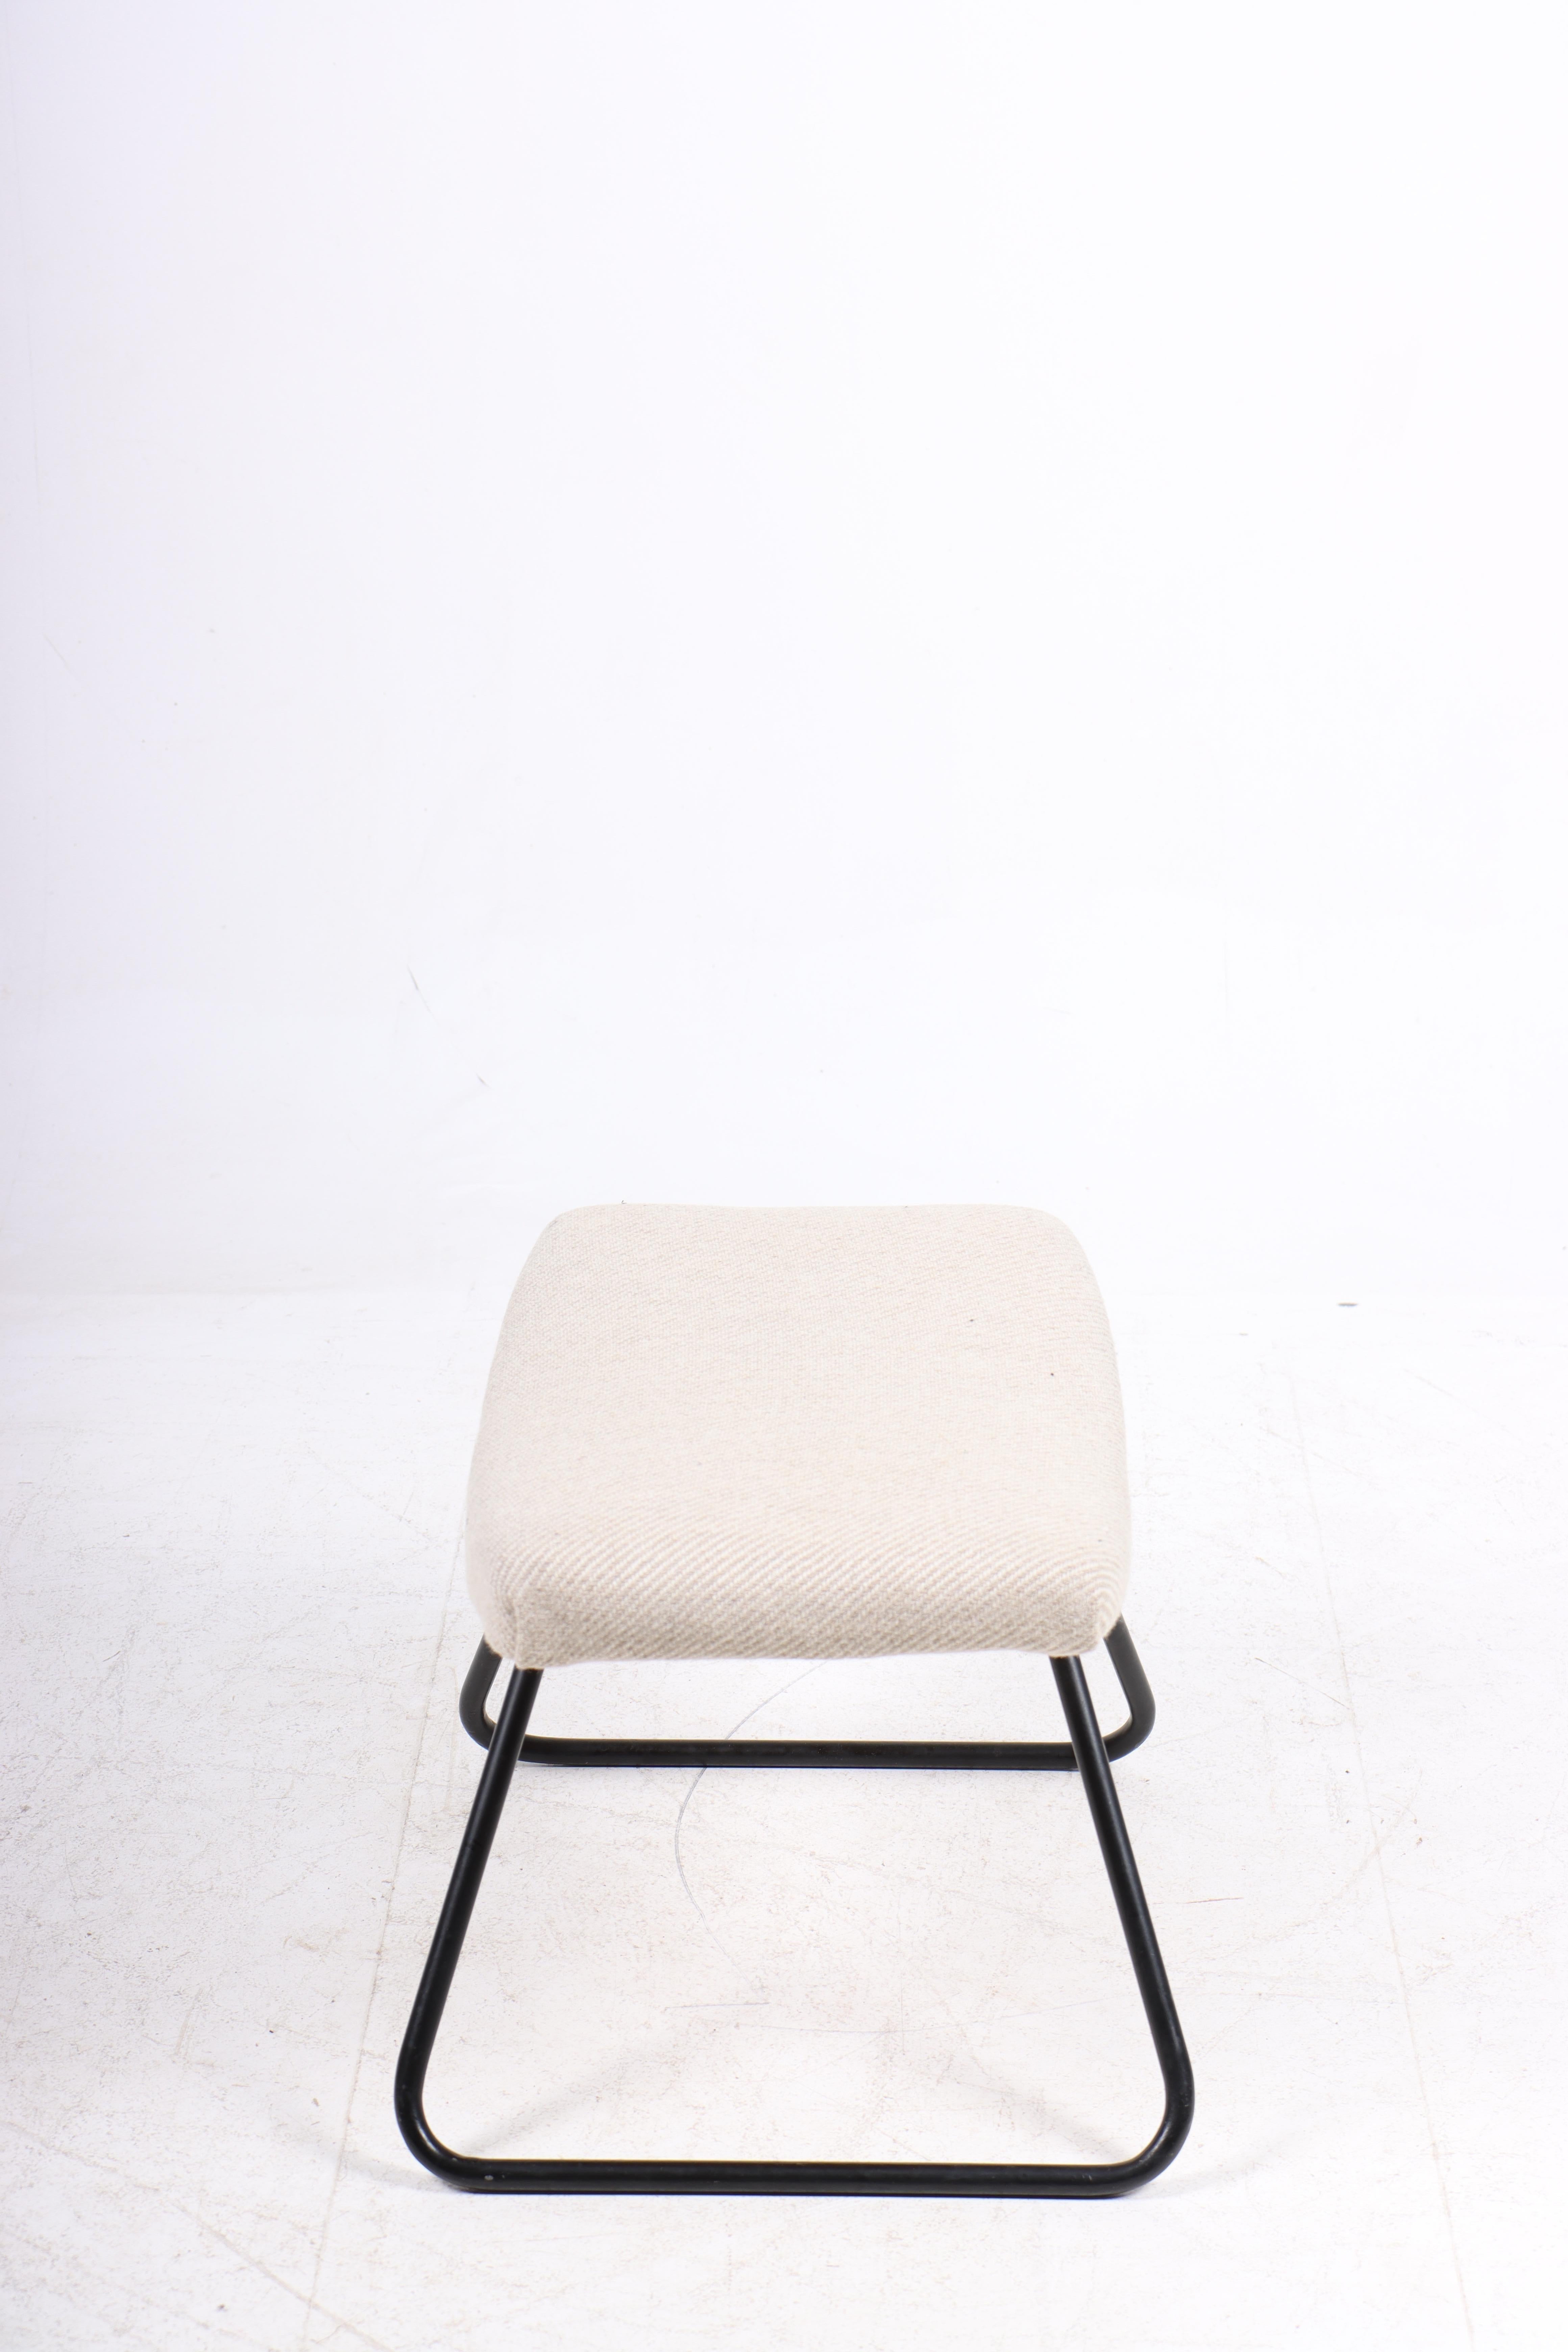 Danish Midcentury Stool with Fabric, Made in Denmark 1960s For Sale